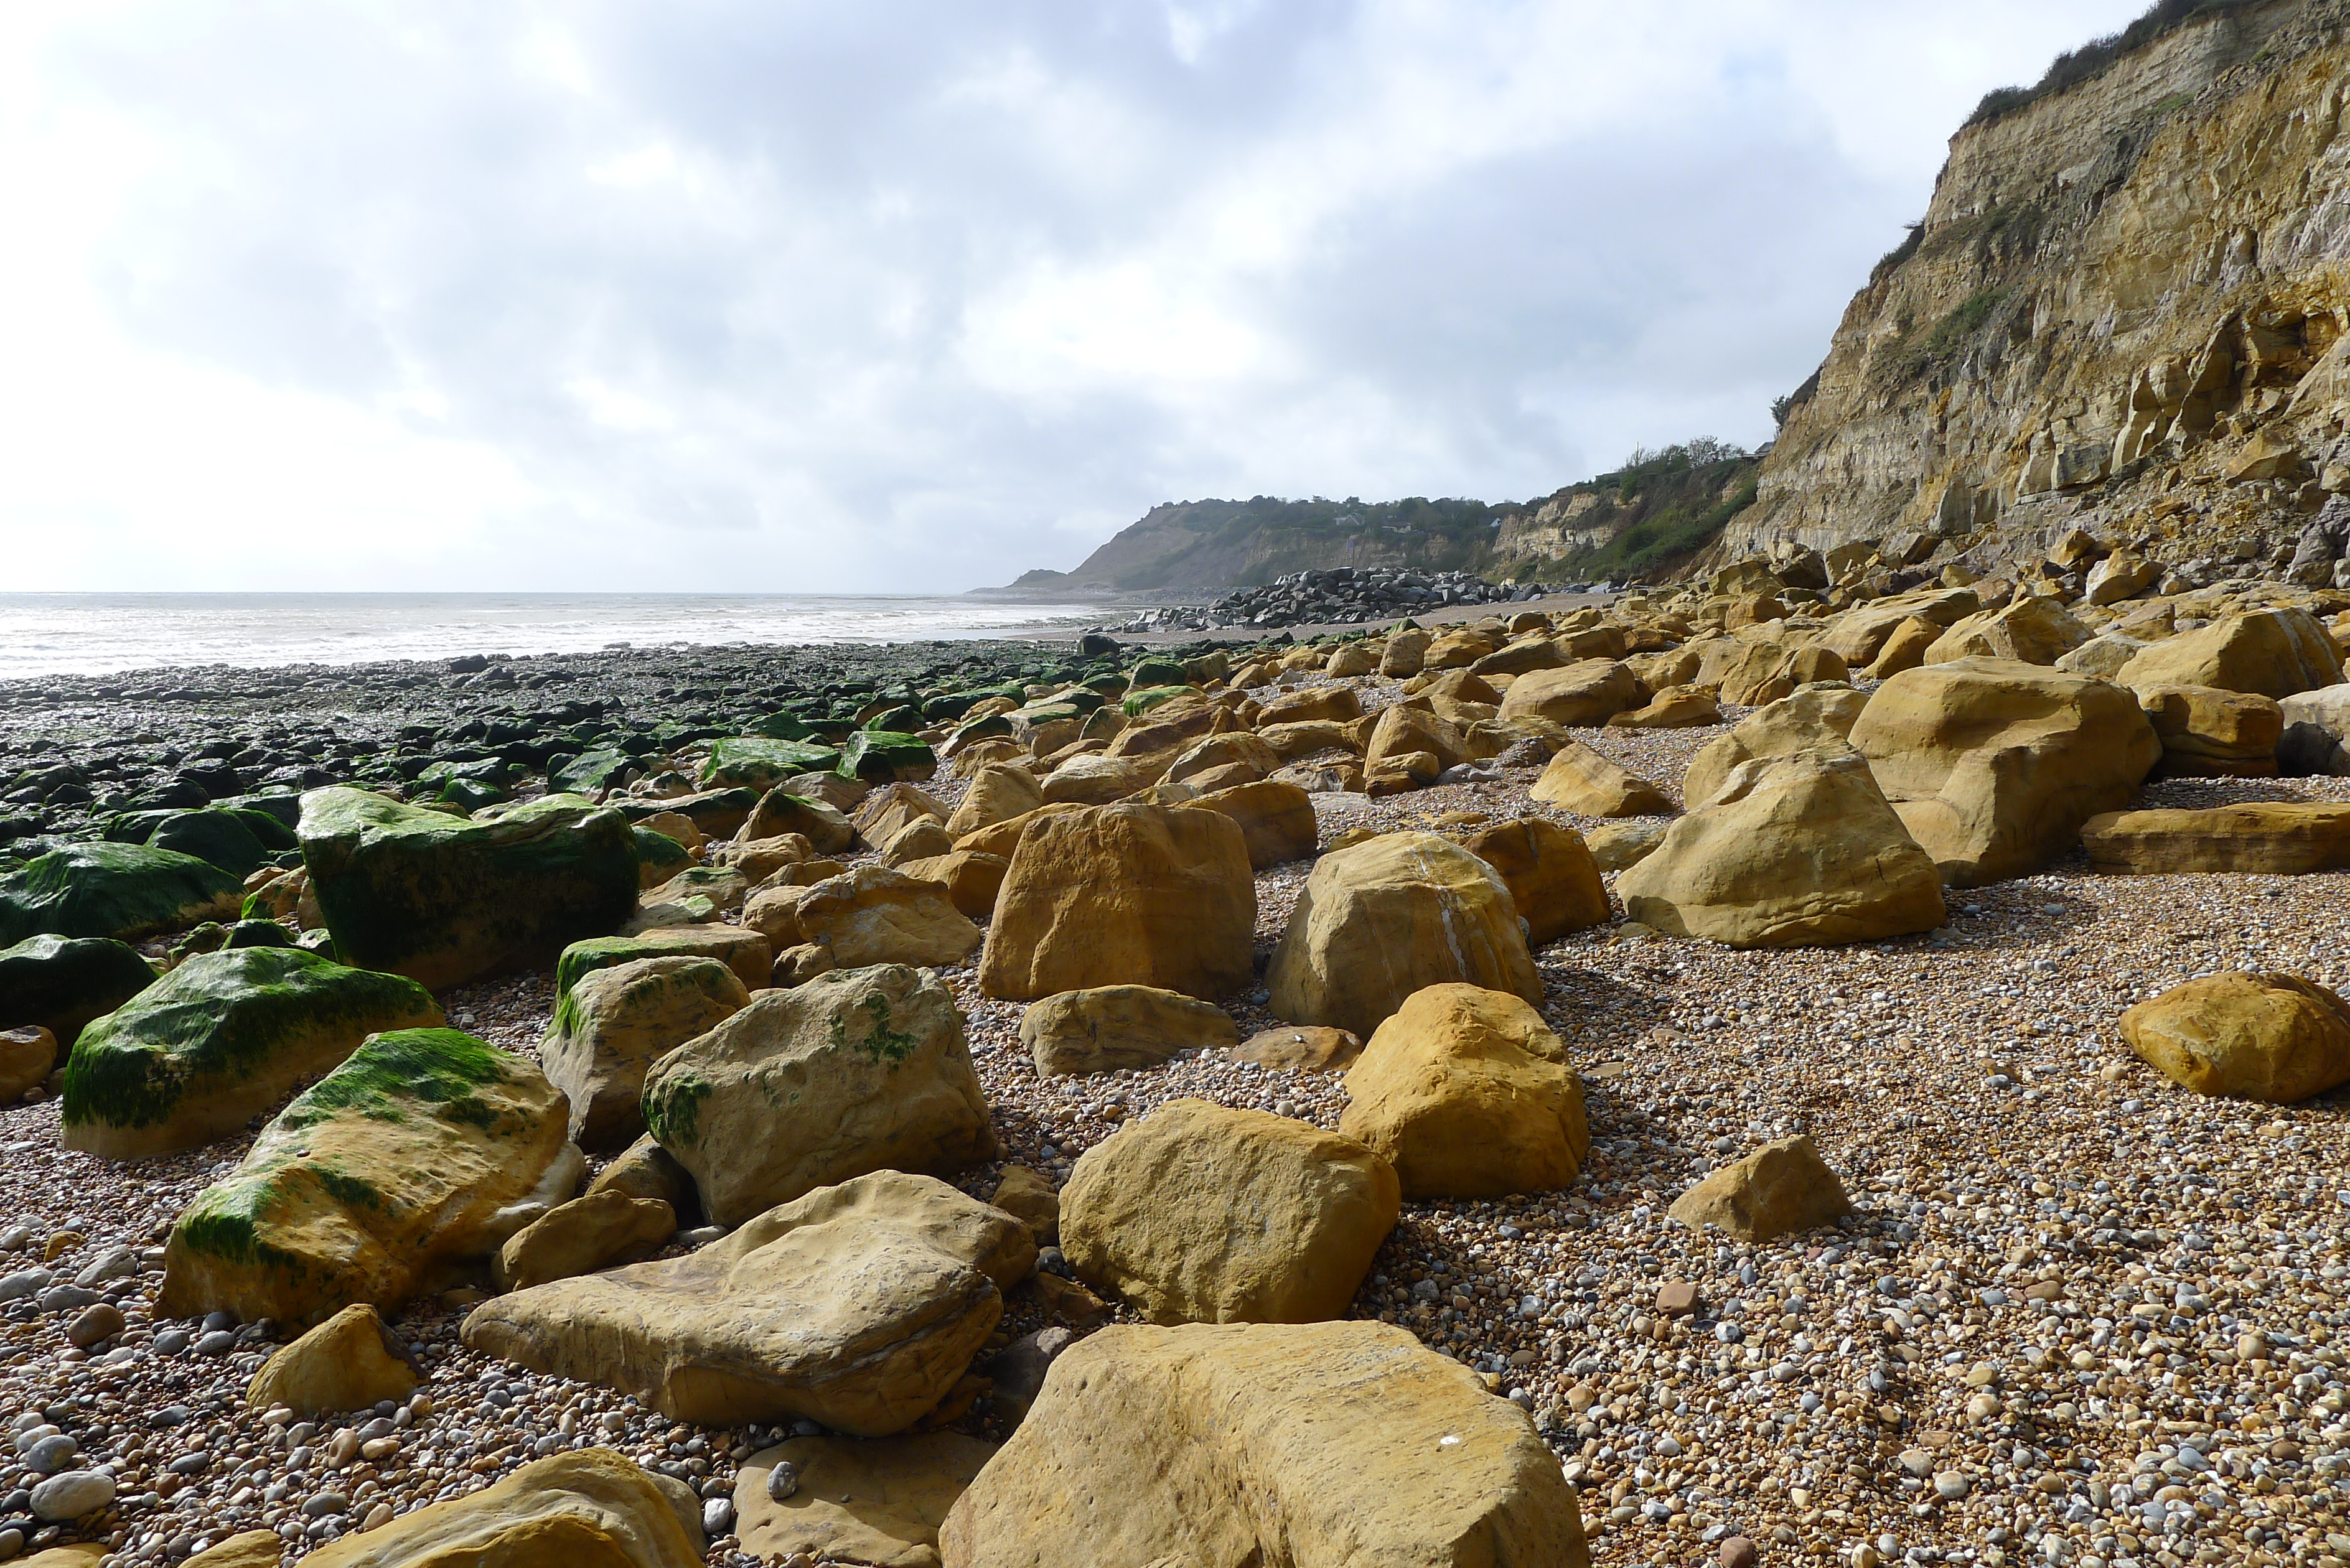 Fairlight Cove and the Epiphany of Teilhard de Chardin